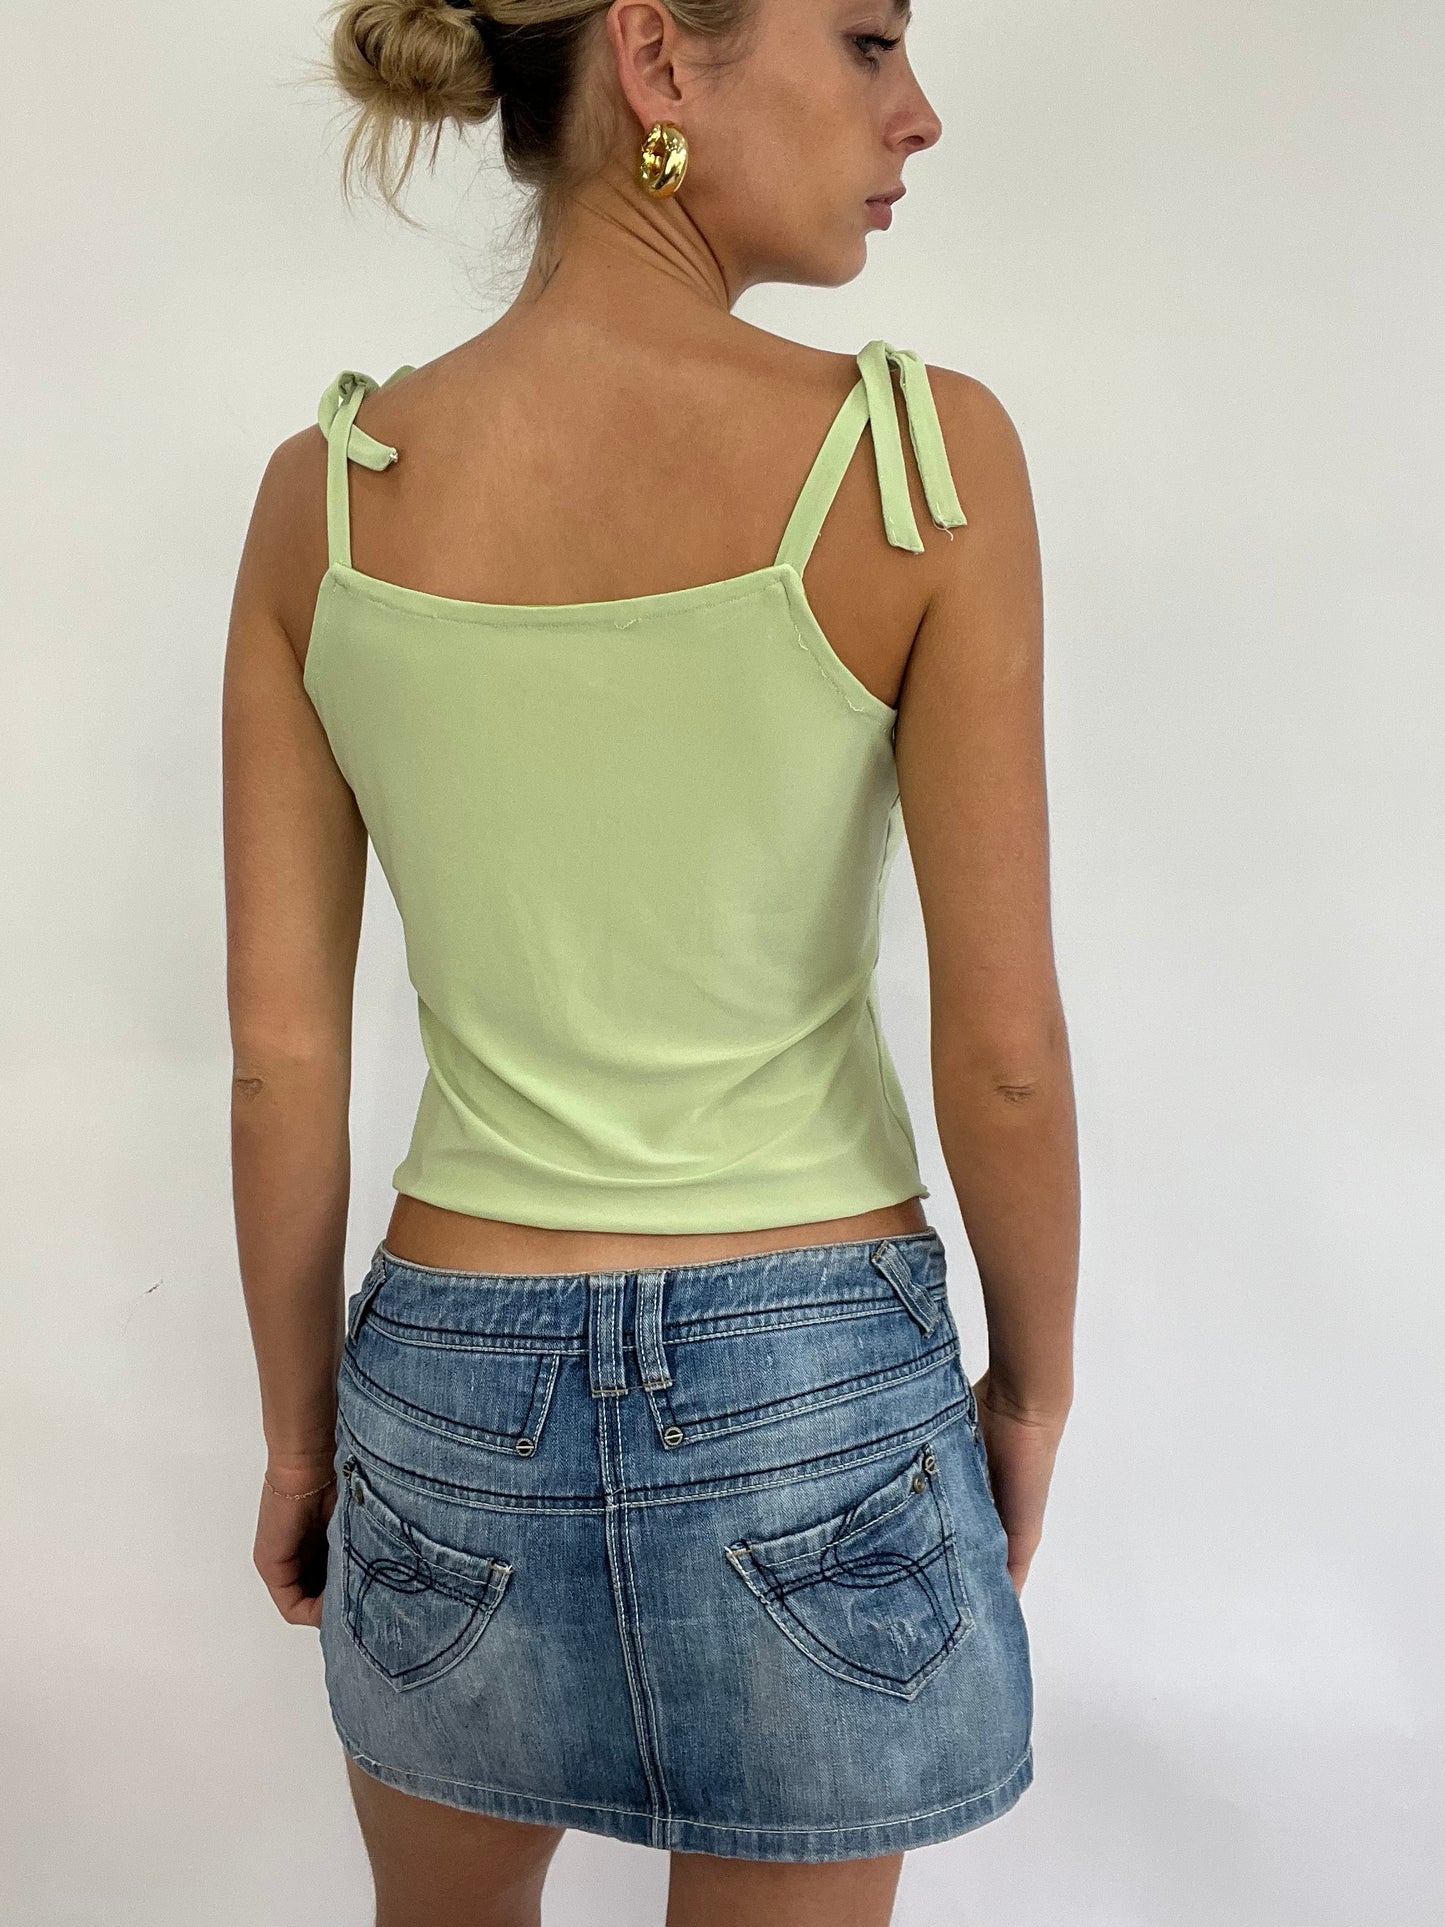 COACHELLA DROP | small green cami with tie up straps and lettuce hem